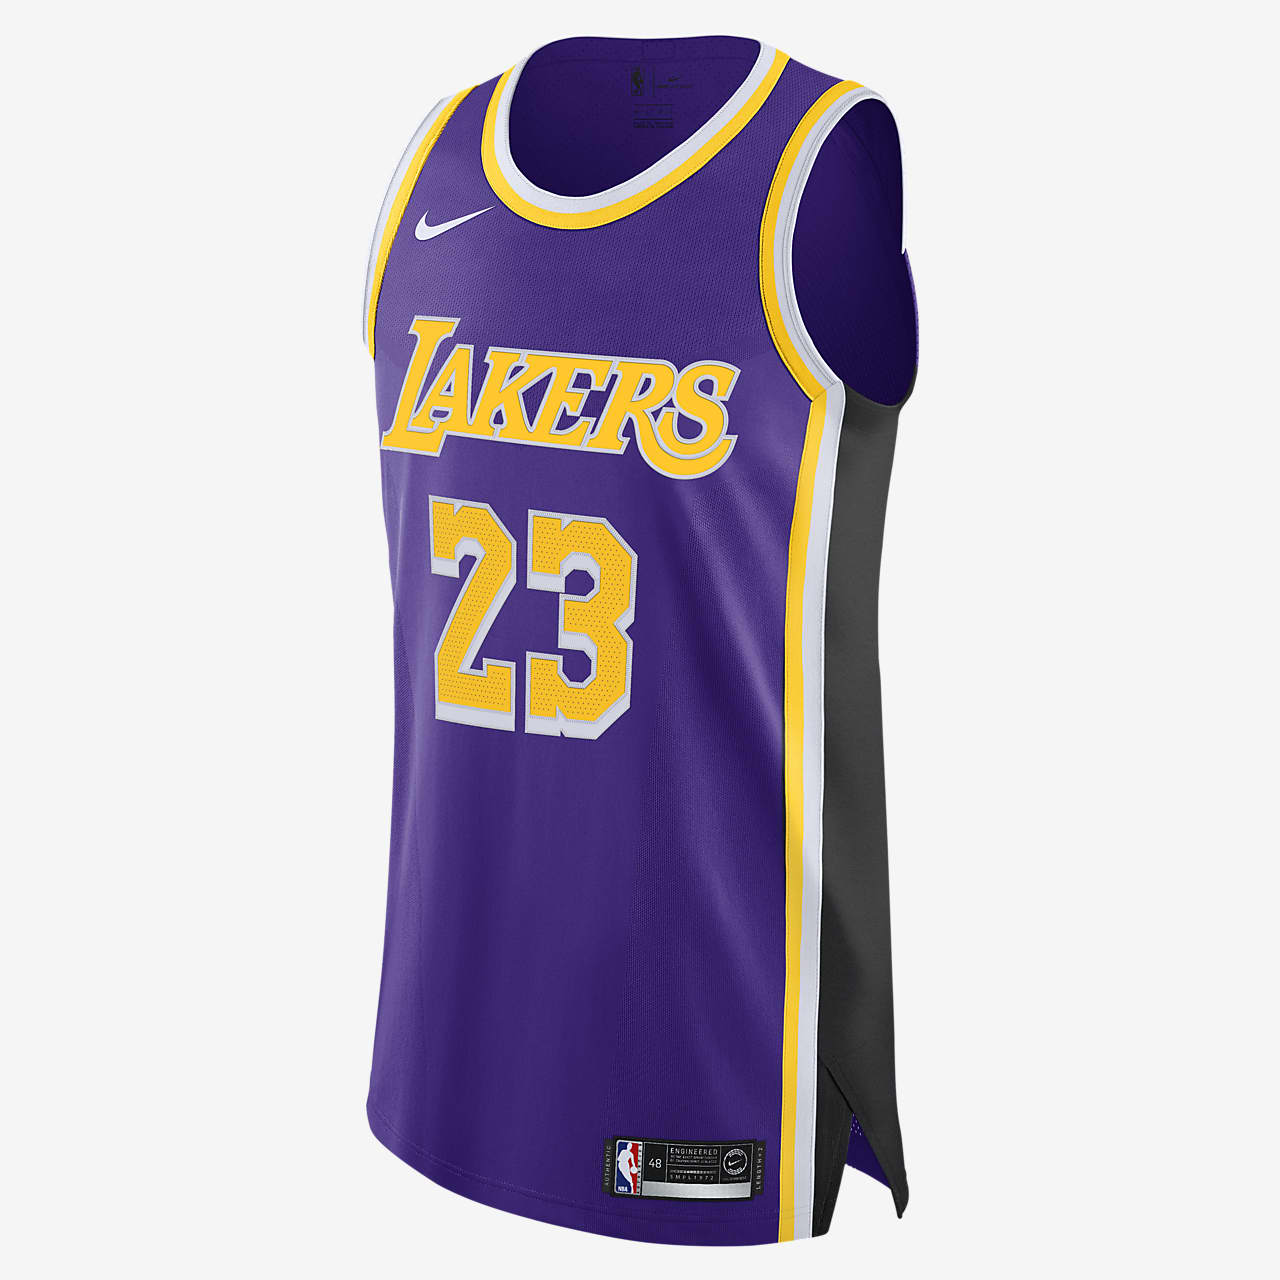 lebron signed lakers jersey